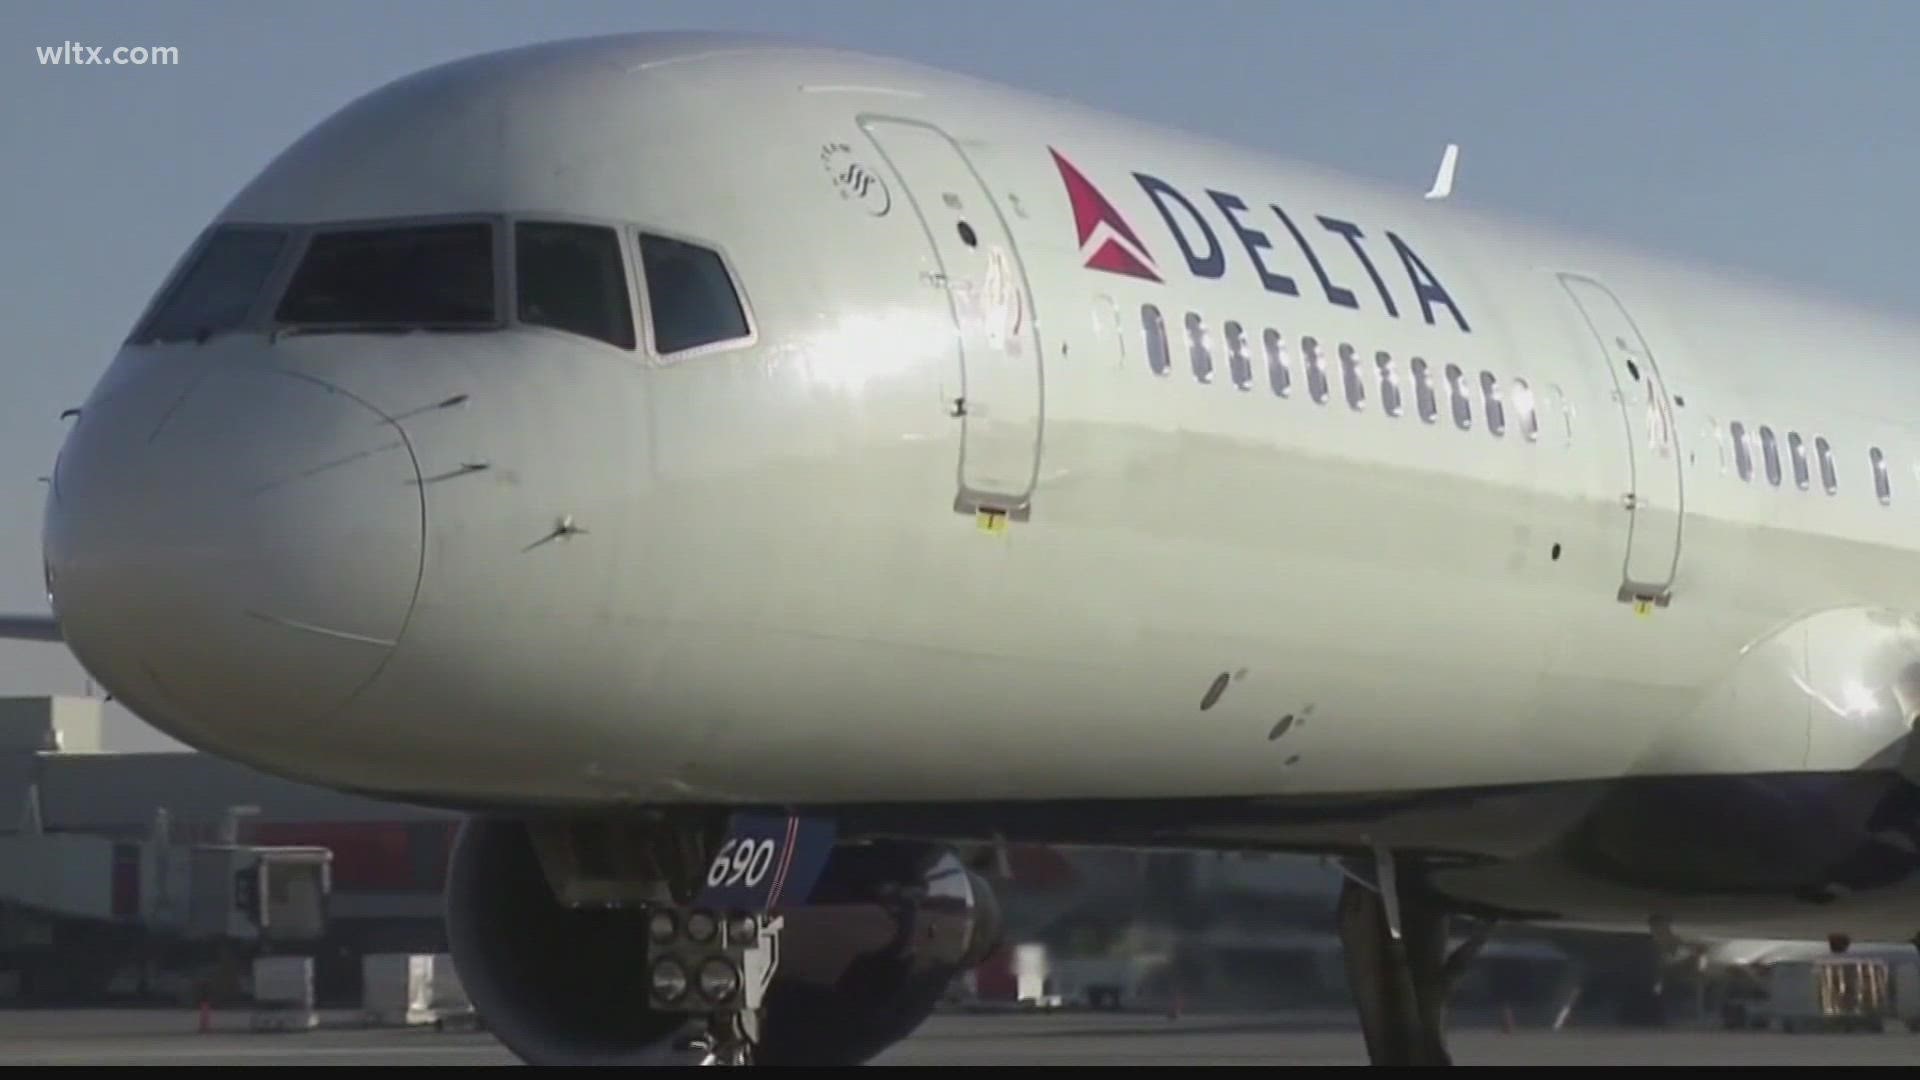 Delta Air Lines will provide free Wi-Fi service on most of its U.S. flights starting in February, CEO Ed Bastian announced Thursday at the CES technology trade show.